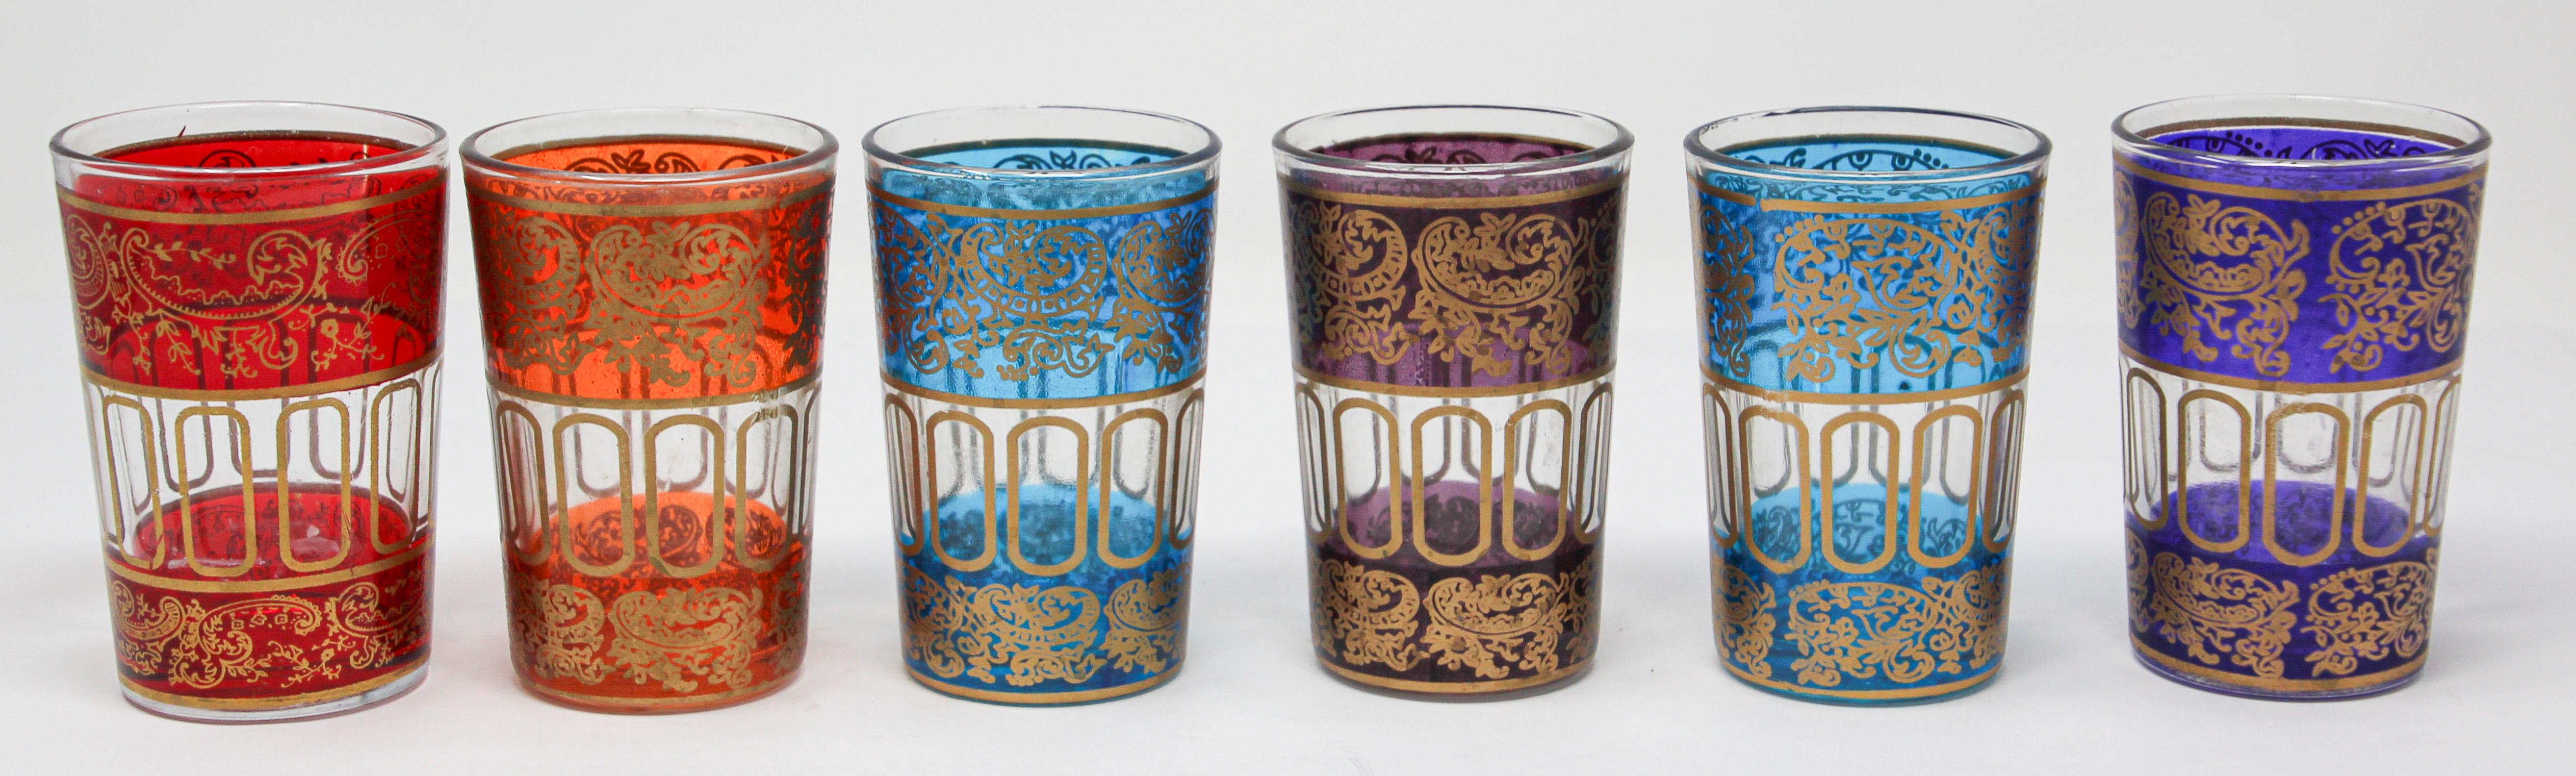 Set of six shot Moroccan colored glasses with gold raised Moorish design.
Decorated with a classical gold and pattern Moorish frieze.
One red, one purple, one orange, two blue, one violet.
Use these elegant glasses for Moroccan tea, or any hot or